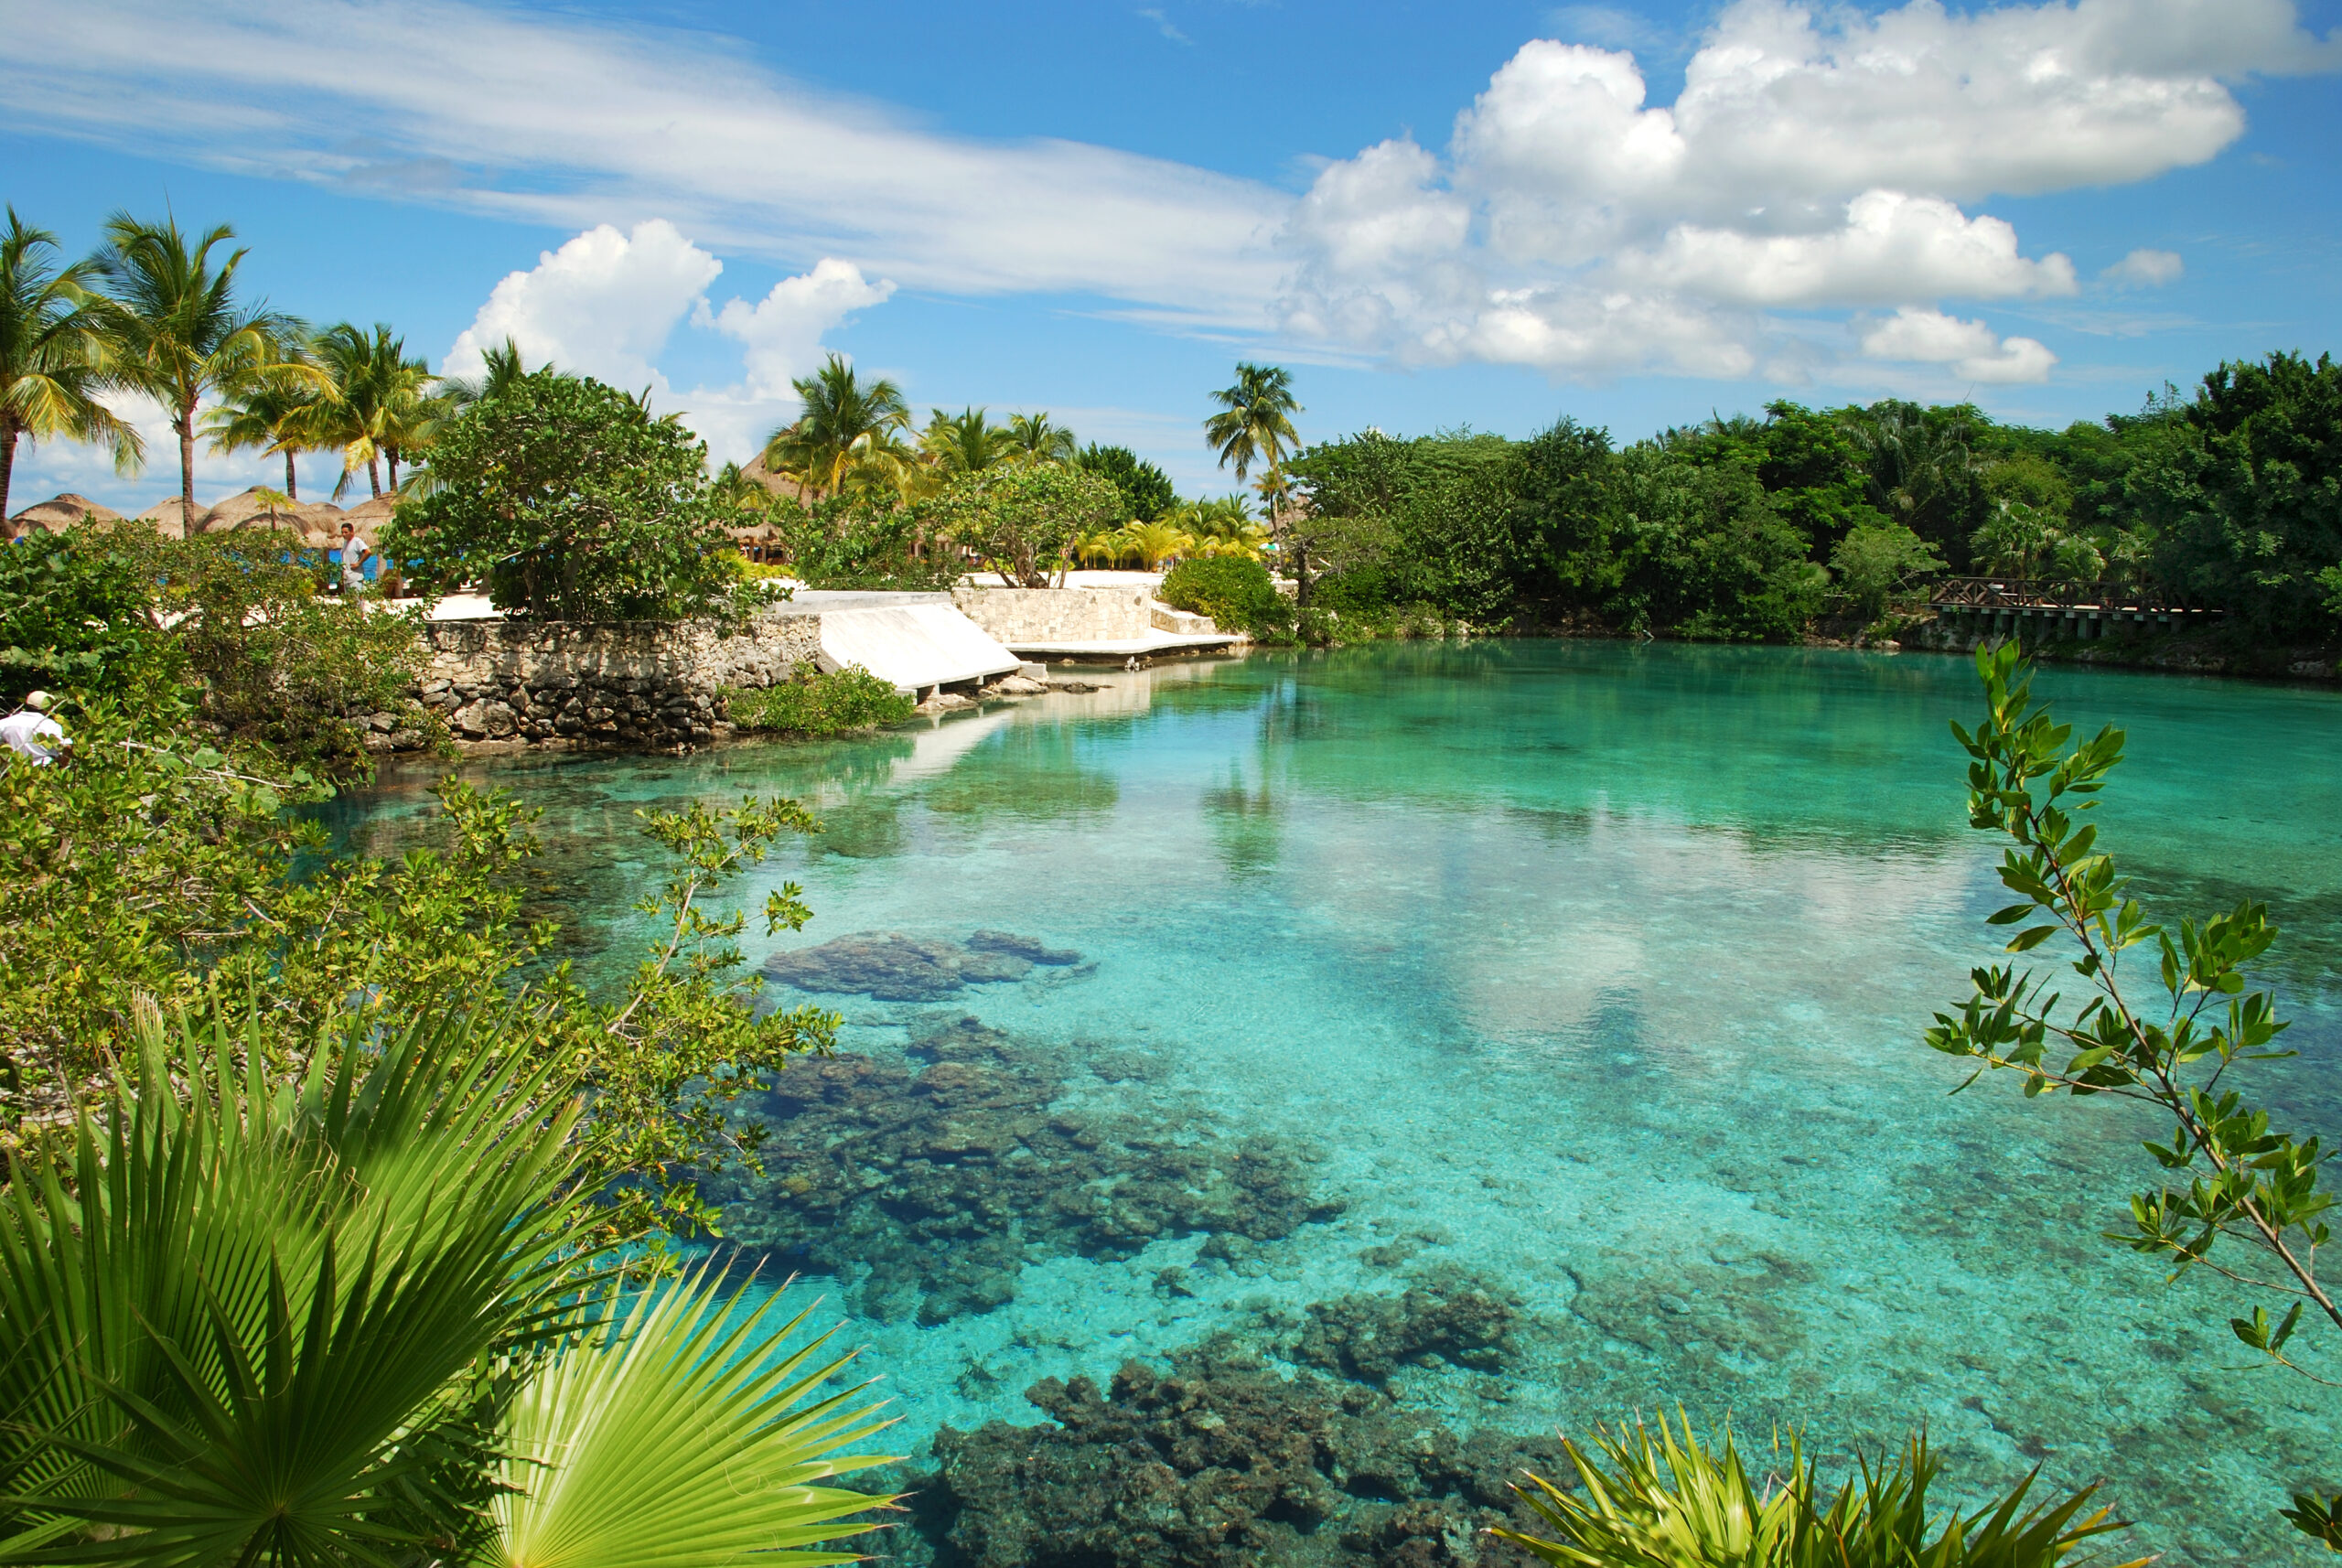 The lagoon of fresh water just next to Caribbean Sea in ecological park on Cozumel island (Mexico).